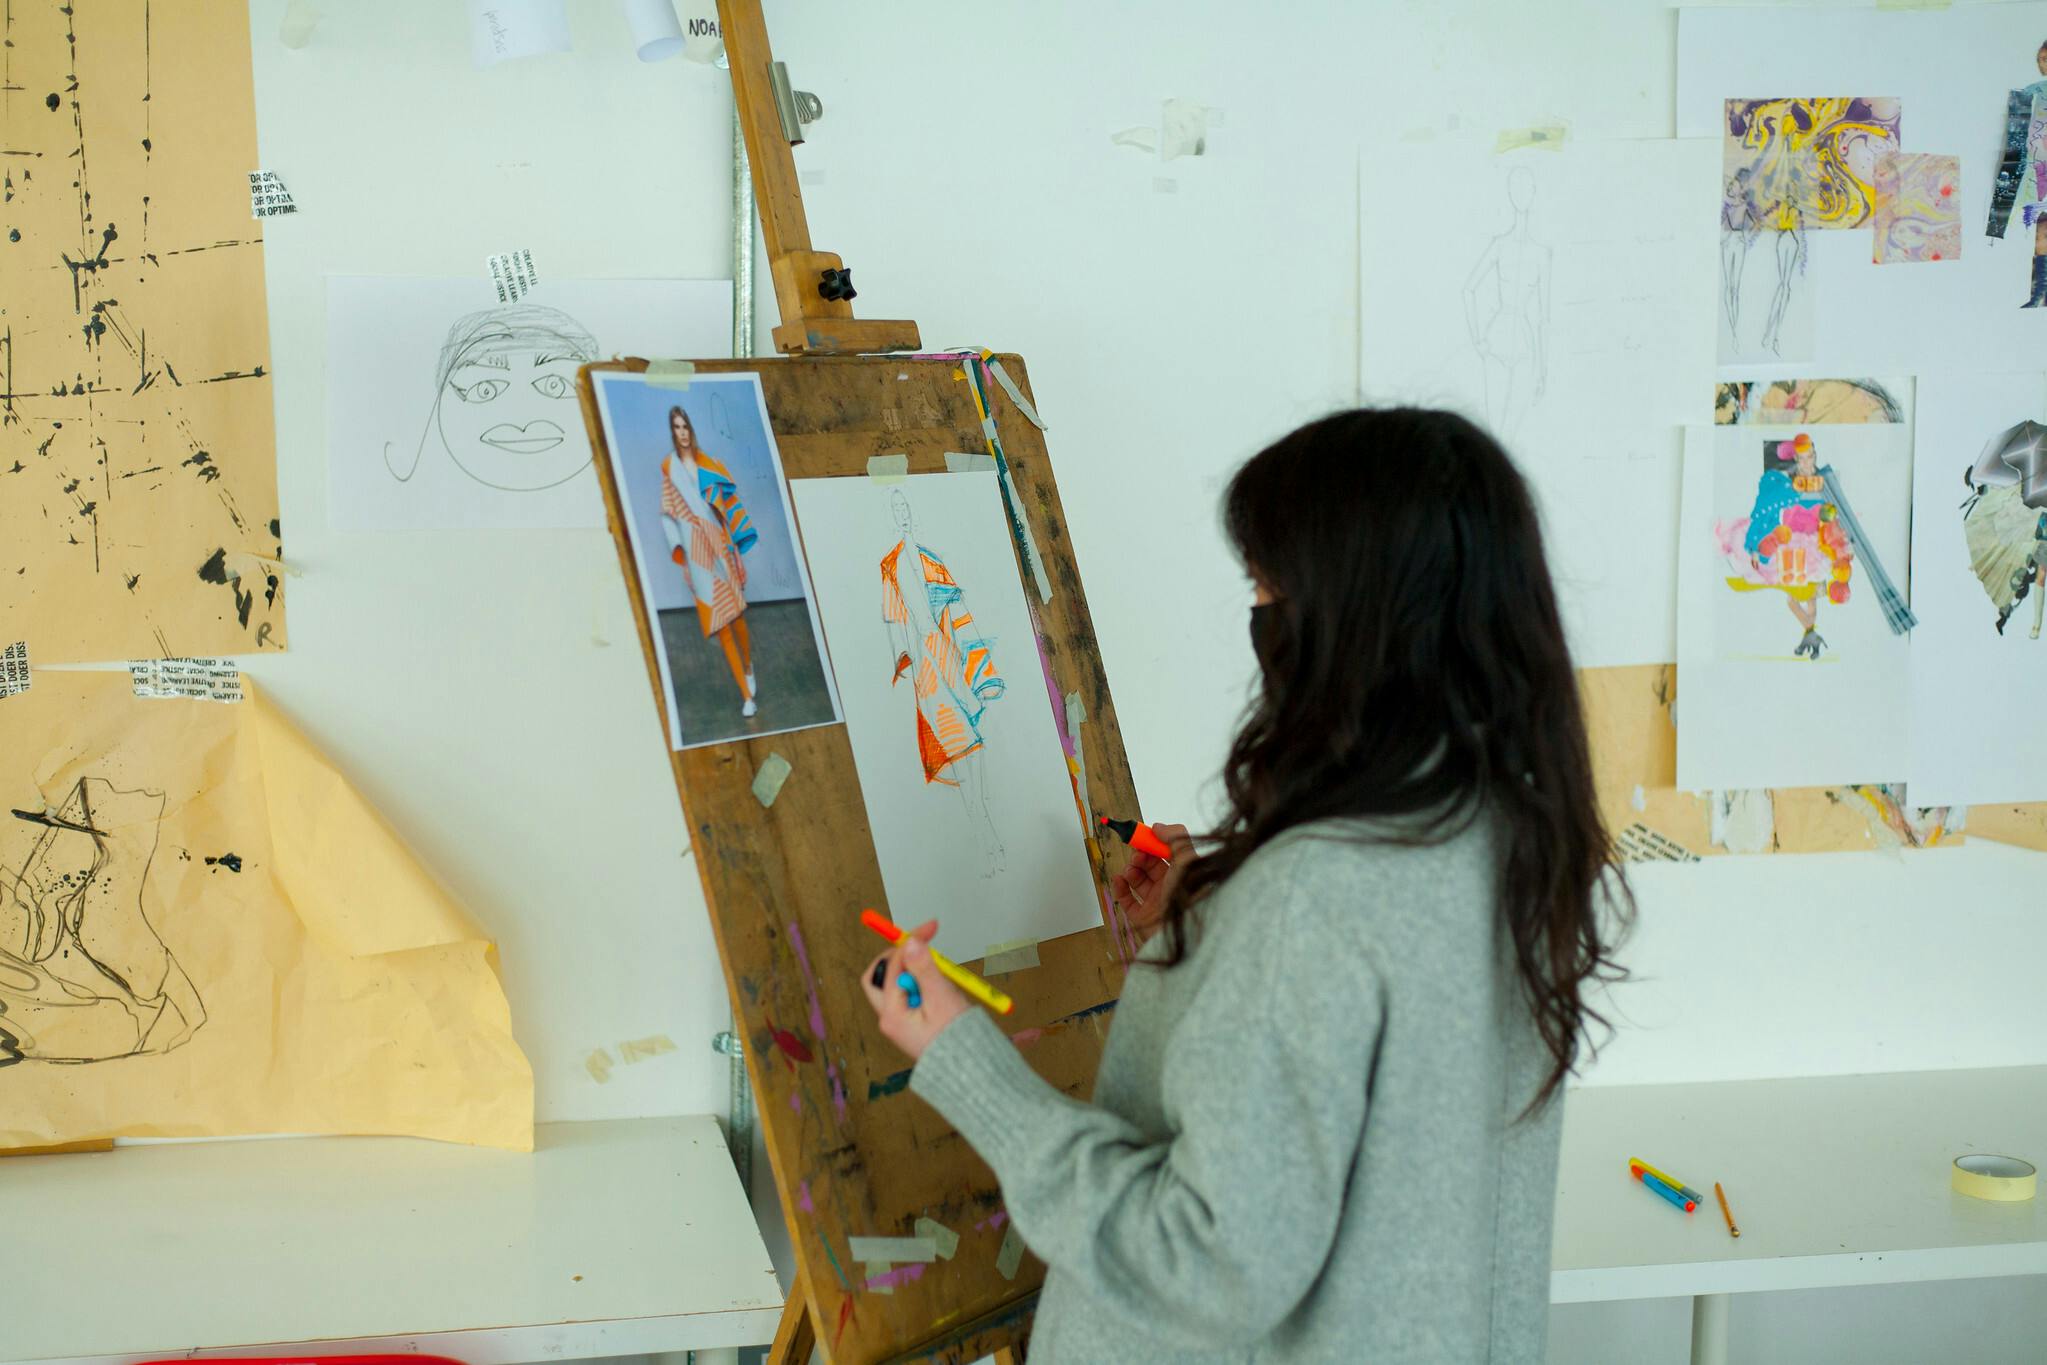 A girl stands at an easel against a wall covered in paintings and sketches. The easel has paper pinned onto it with the beginnings of a fashion illustration